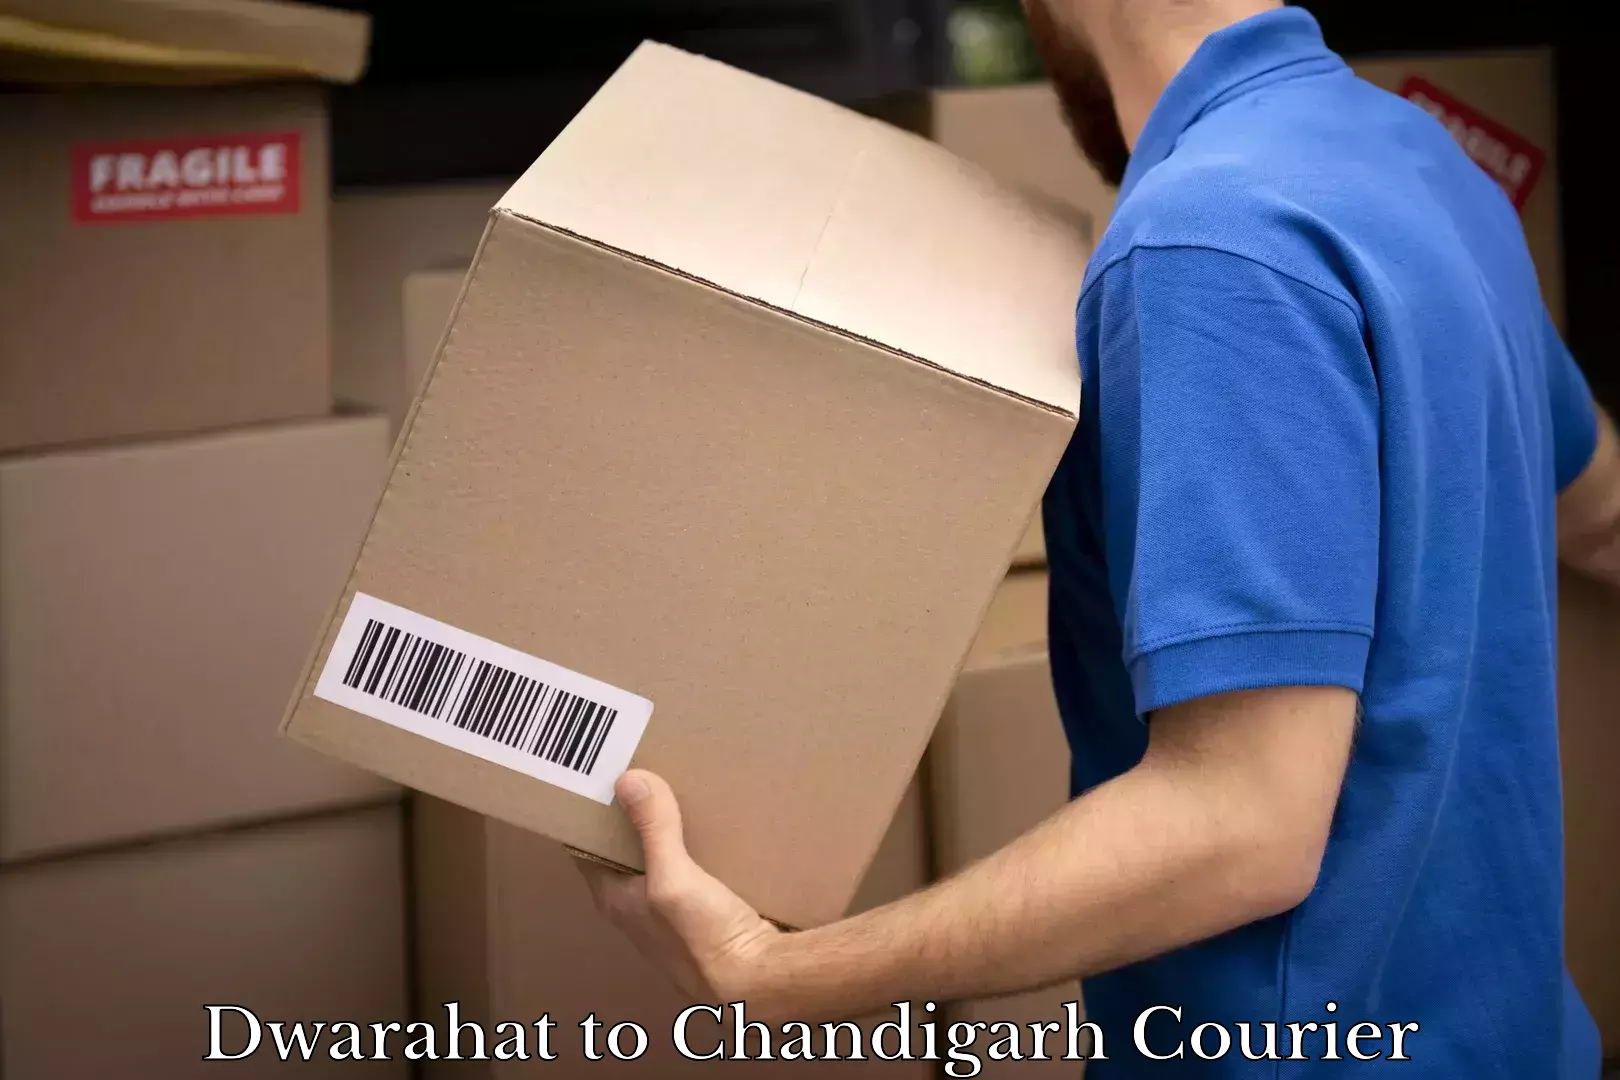 State-of-the-art courier technology Dwarahat to Chandigarh